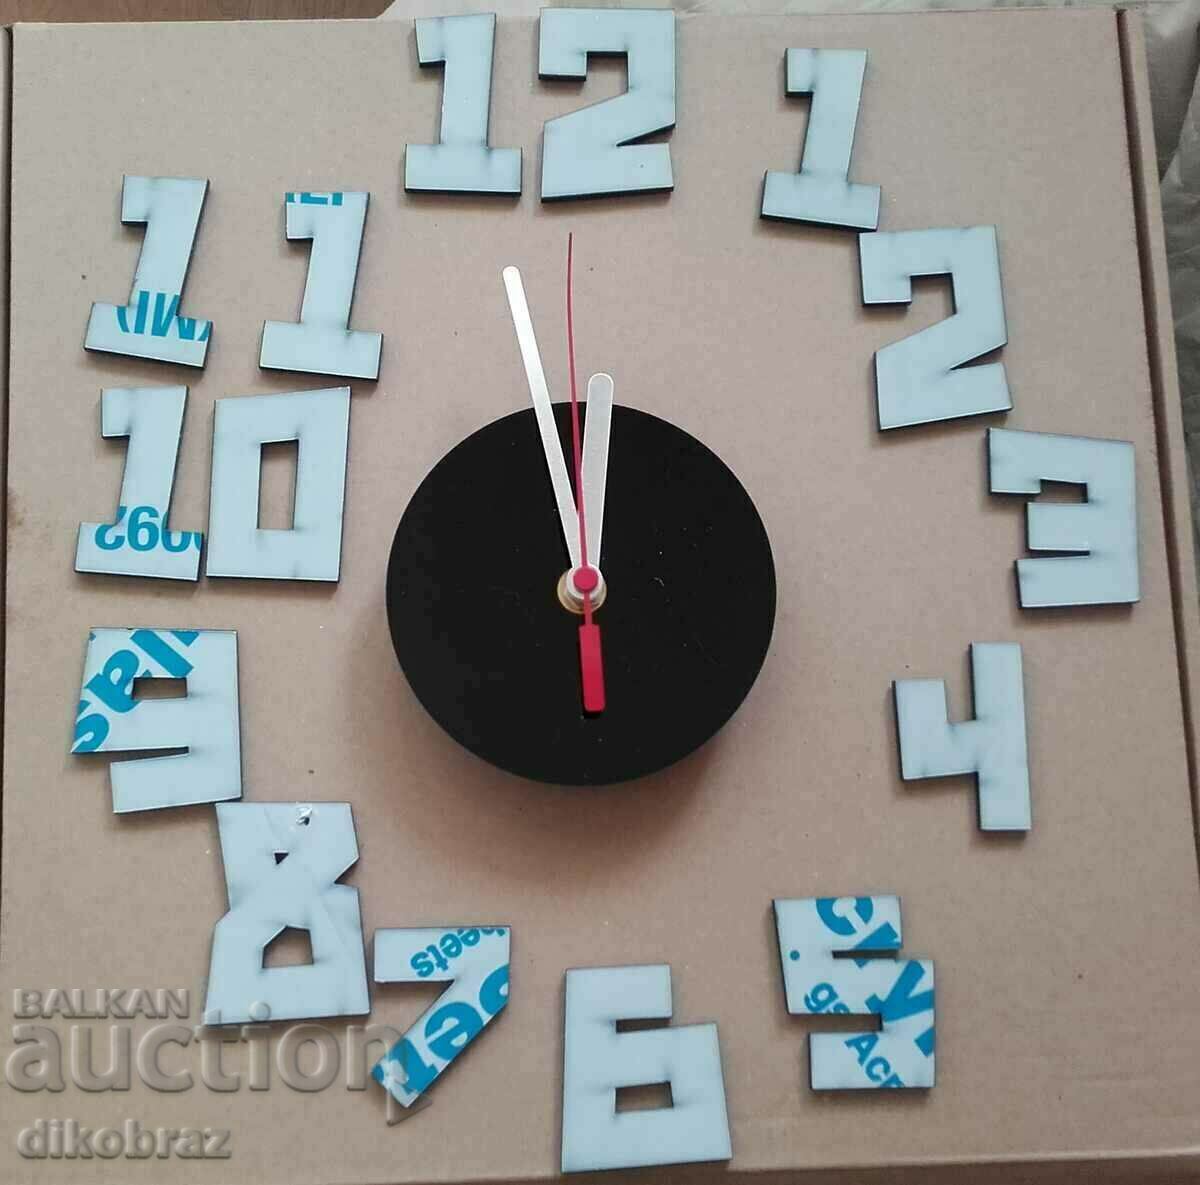 NEW wall clock Reverse rotation Crazy clock from a penny